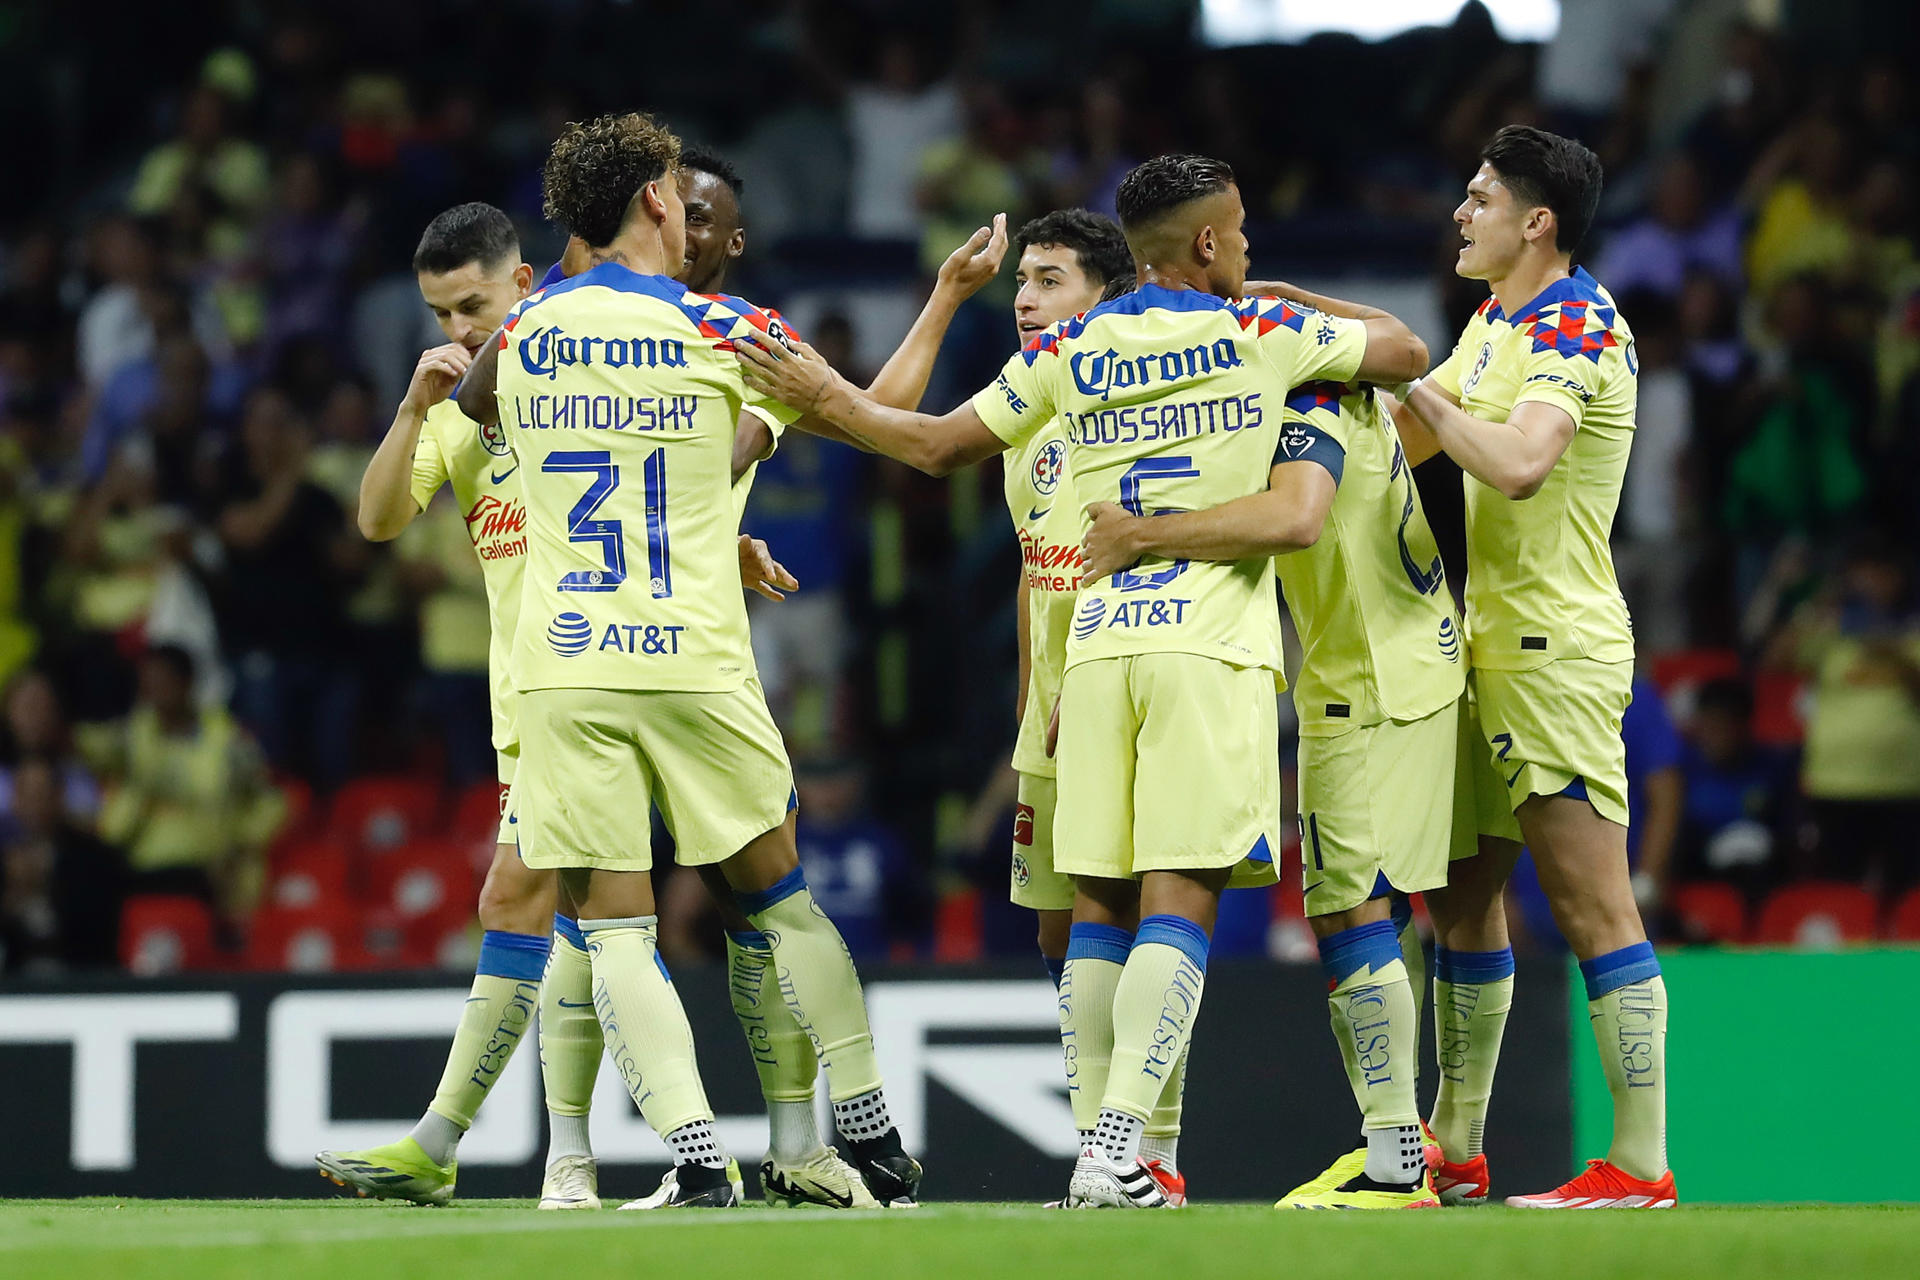 america-finishes-first-in-the-general-table-of-the-clausura-tournament-in-liga-mx-and-will-seek-to-revalidate-its-title